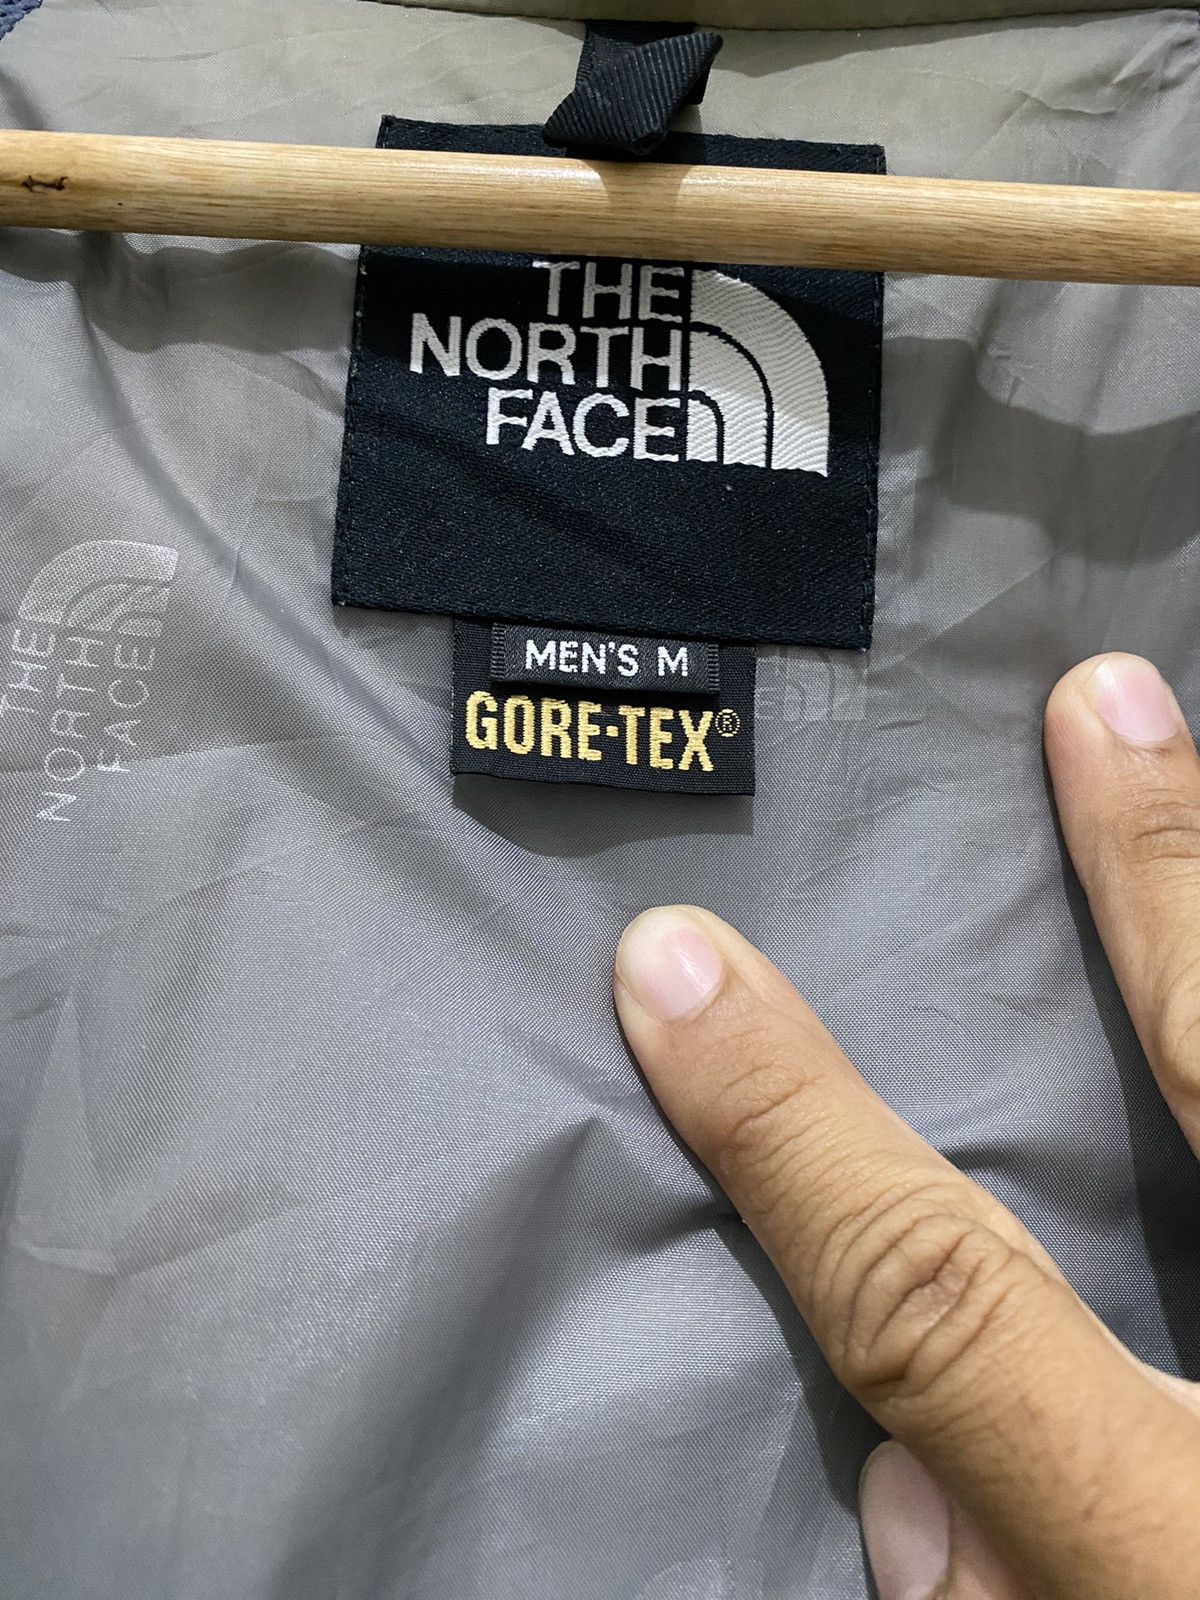 The North Face Gore-Tex Gorpcore Jacket - 10